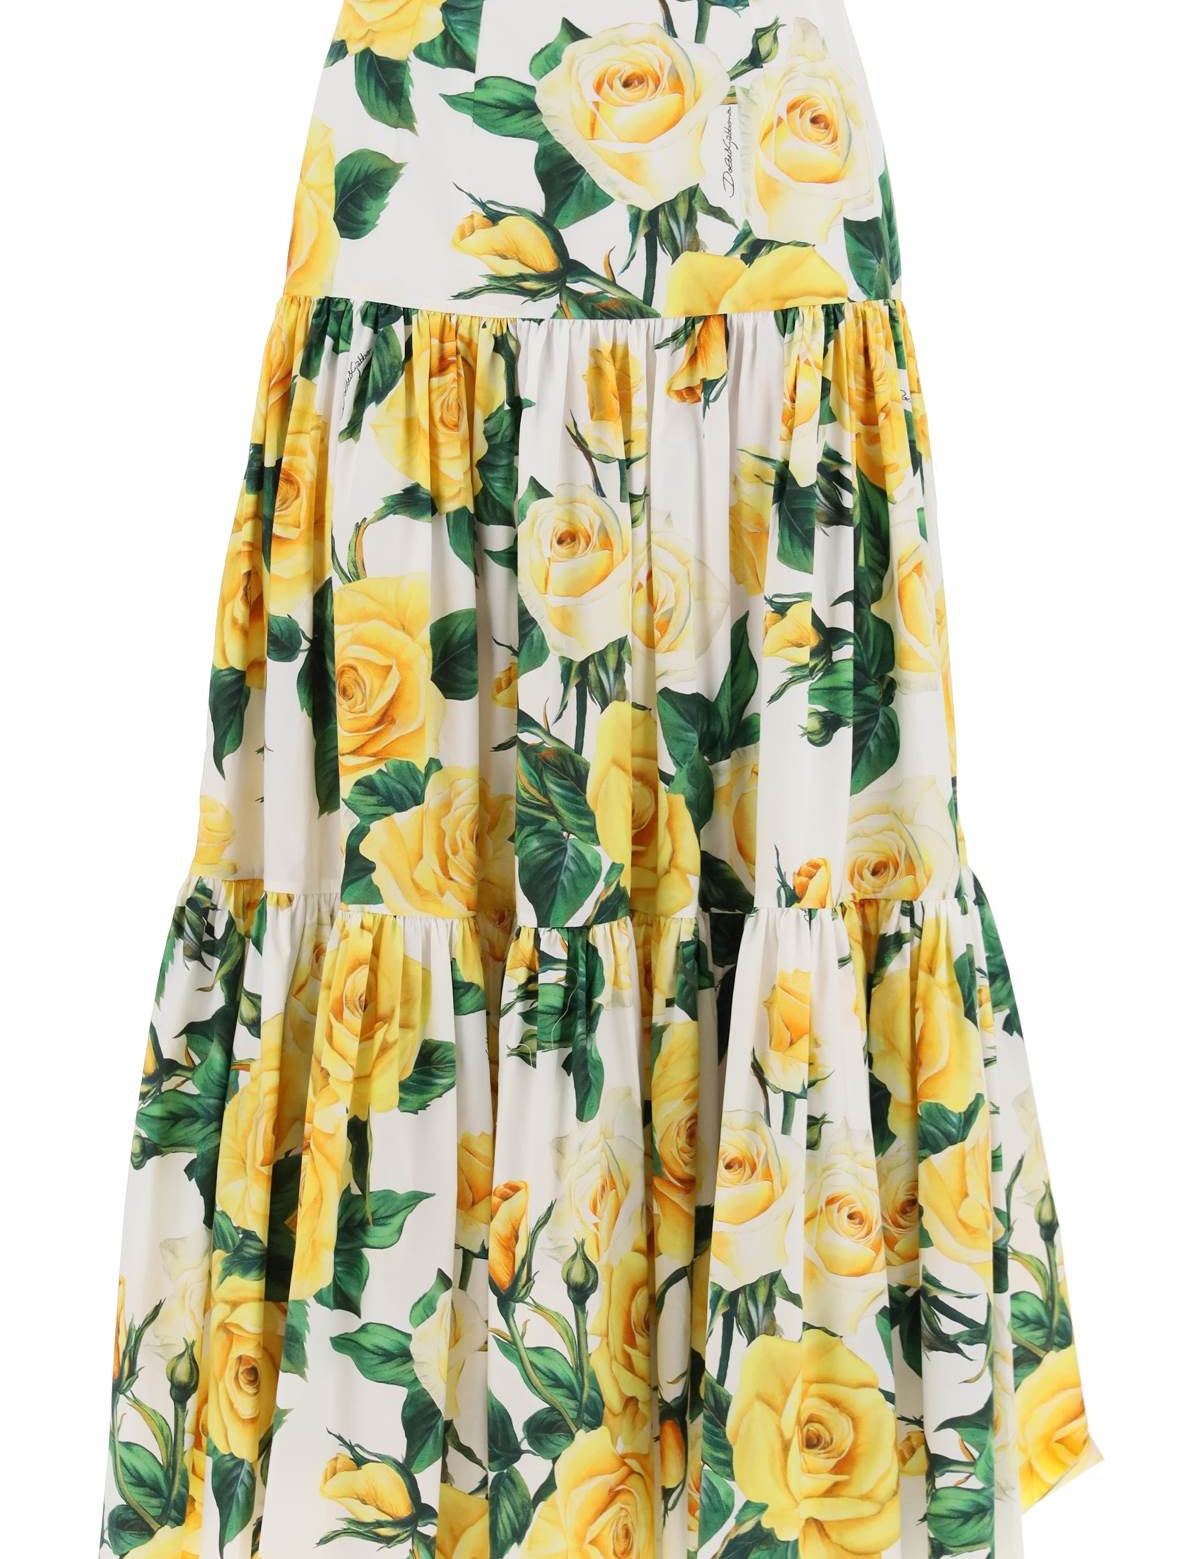 long-skirt-with-ruffle-details-and-yellow-rose.jpg